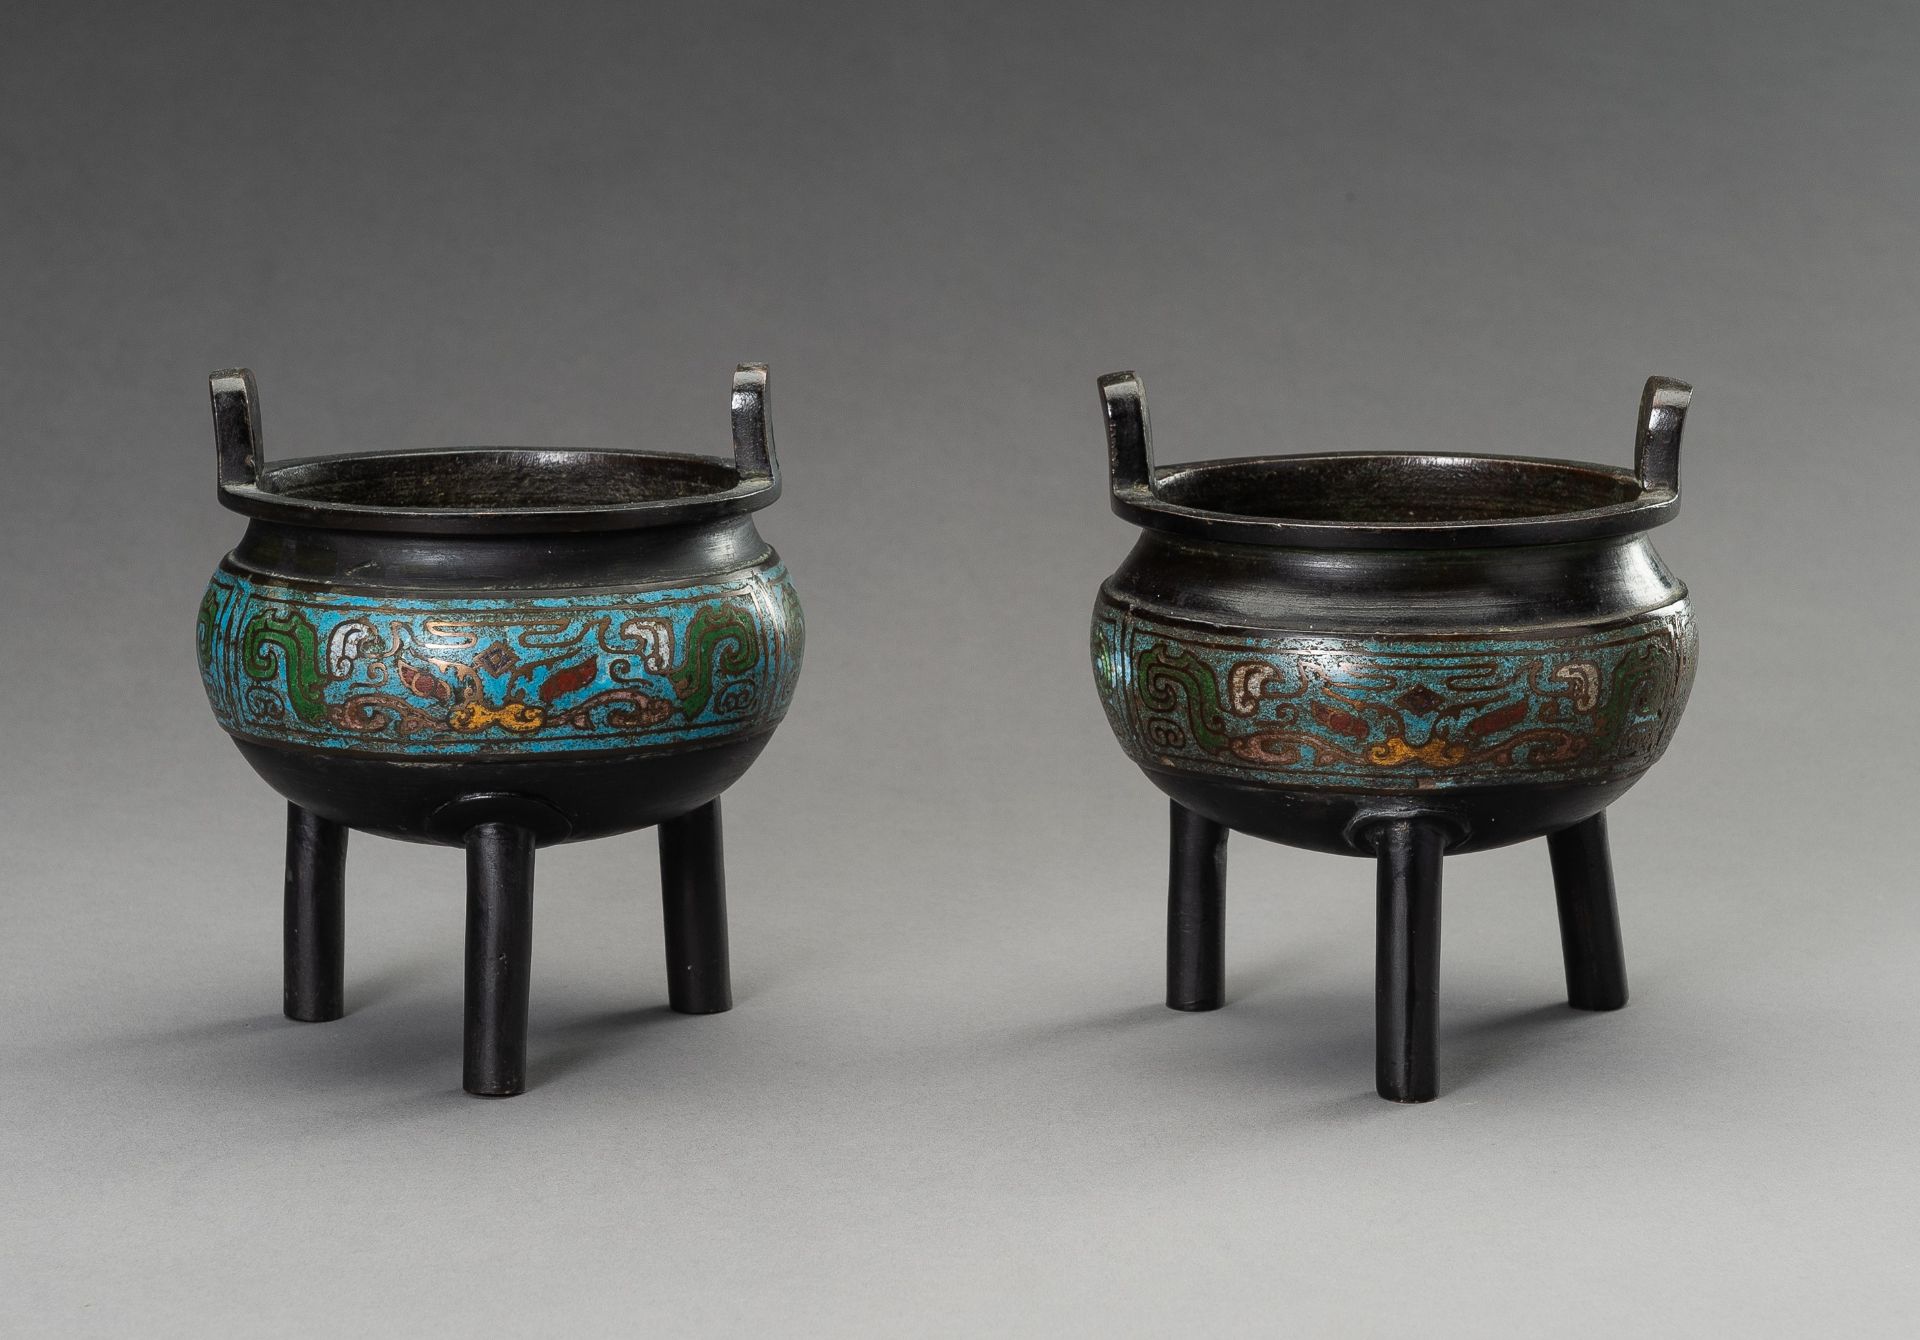 A PAIR OF CHAMPLEVE ENAMEL BRONZE TRIPOD CENSERS, QING DYNASTY